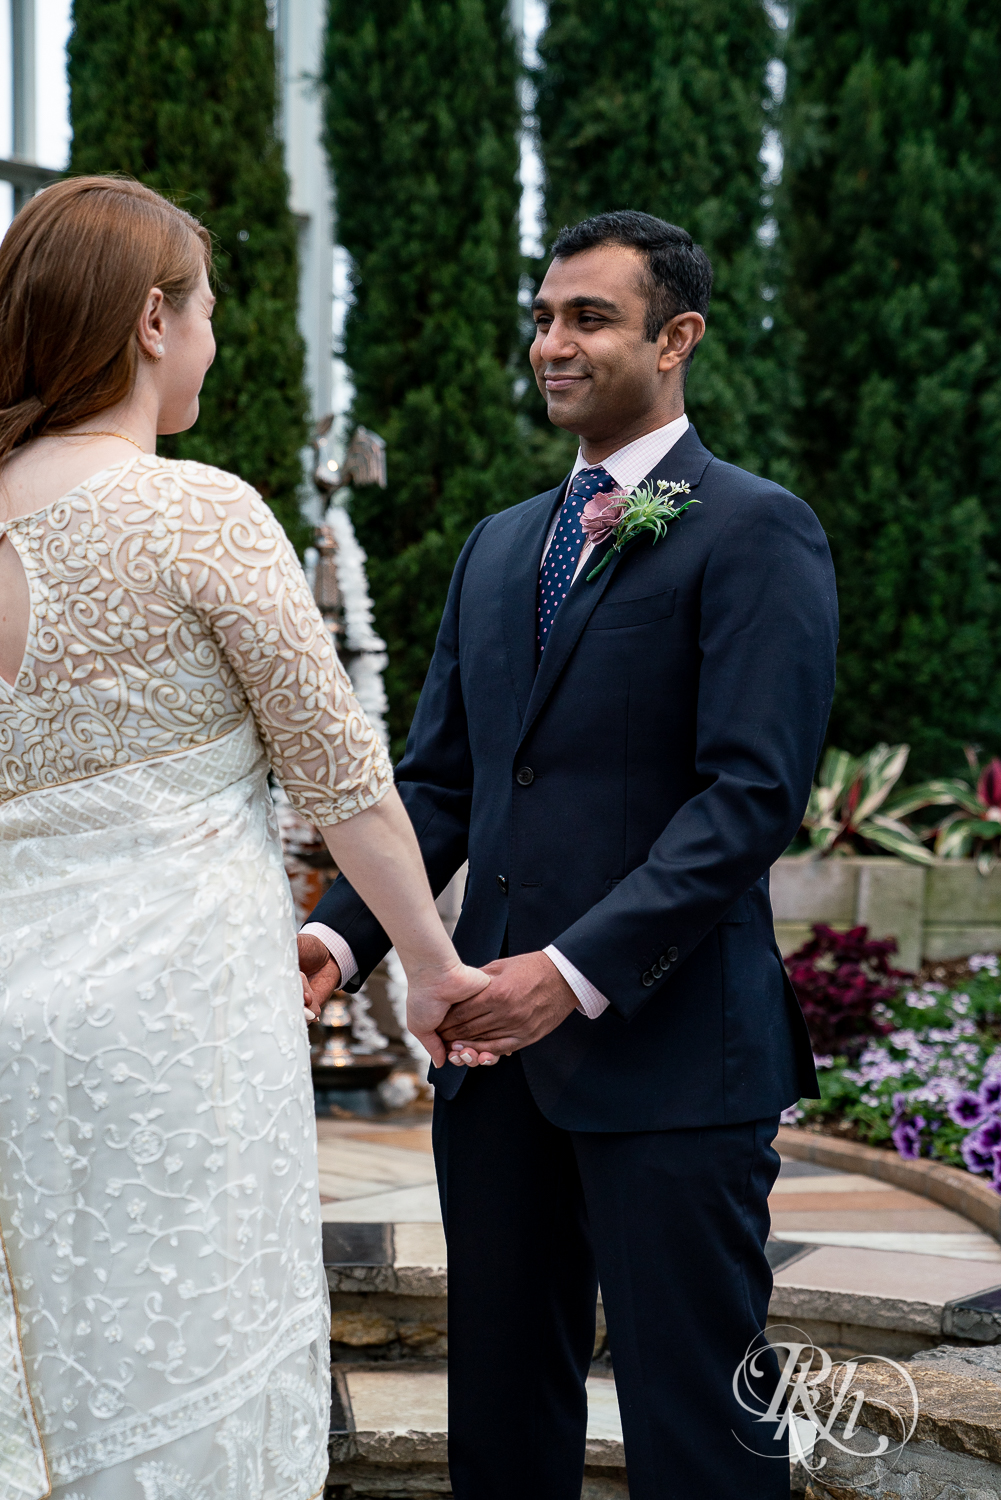 Bride and groom smiling during ceremony at Indian wedding at Como Zoo Conservatory in Saint Paul, Minnesota.